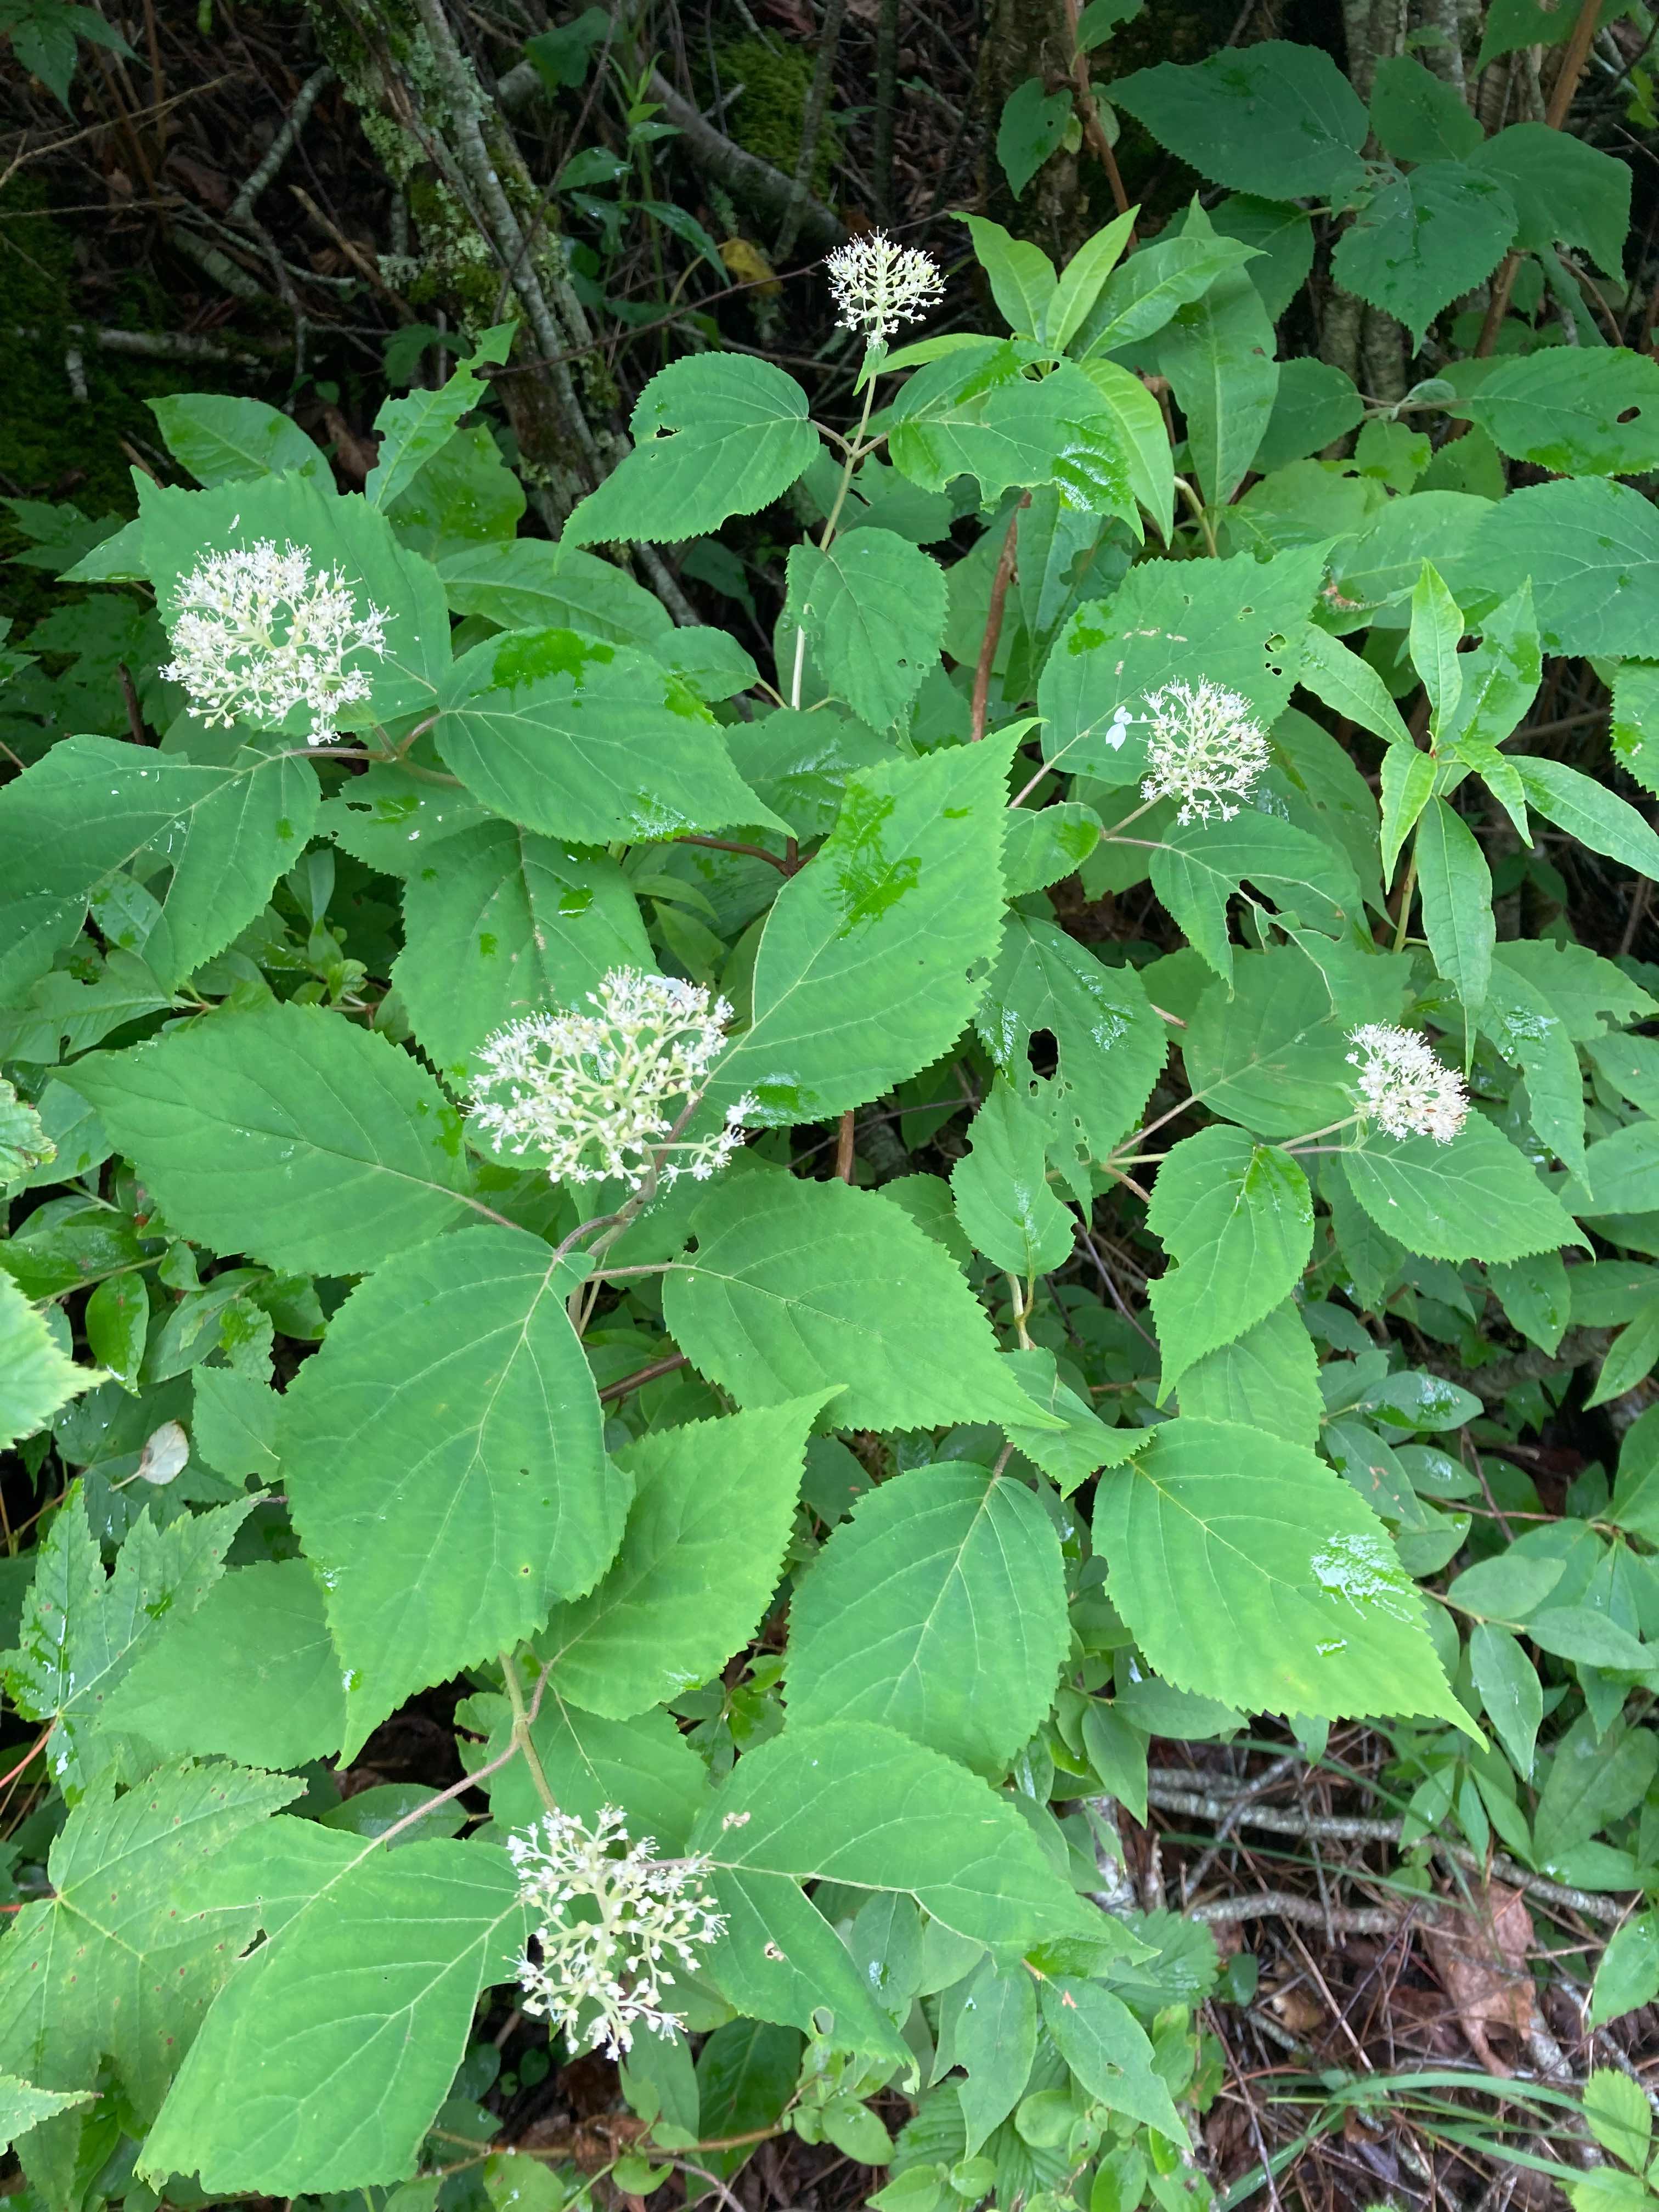 The Scientific Name is Hydrangea arborescens. You will likely hear them called Wild Hydrangea, Sevenbark. This picture shows the The ovate shaped serrated leaves have an acuminate tip. of Hydrangea arborescens